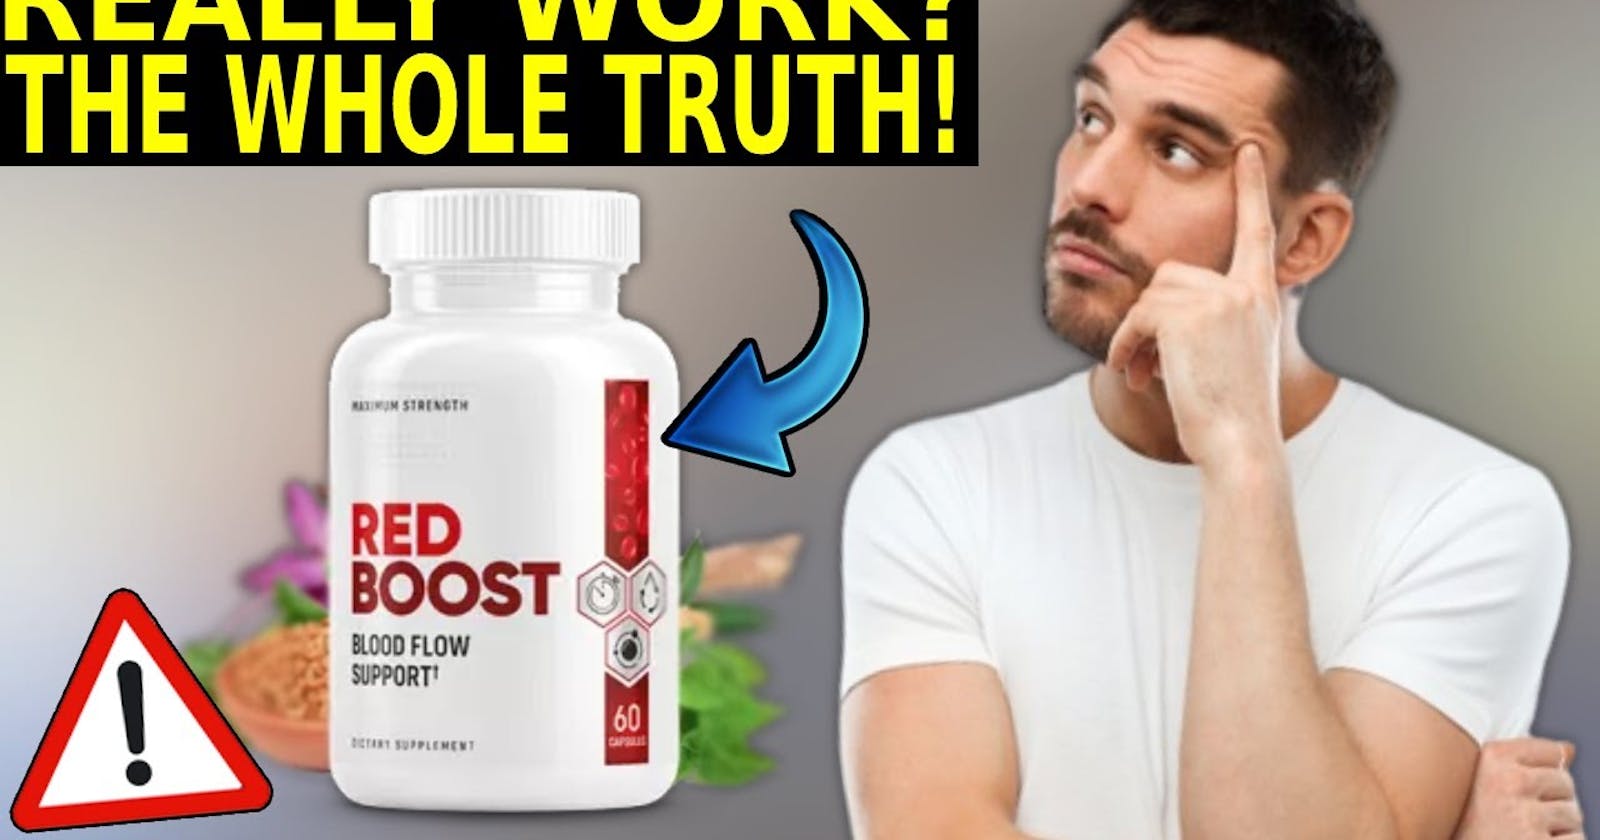 Red Boost - Health Reviews, Uses, Benefits, Scam Or Legit?